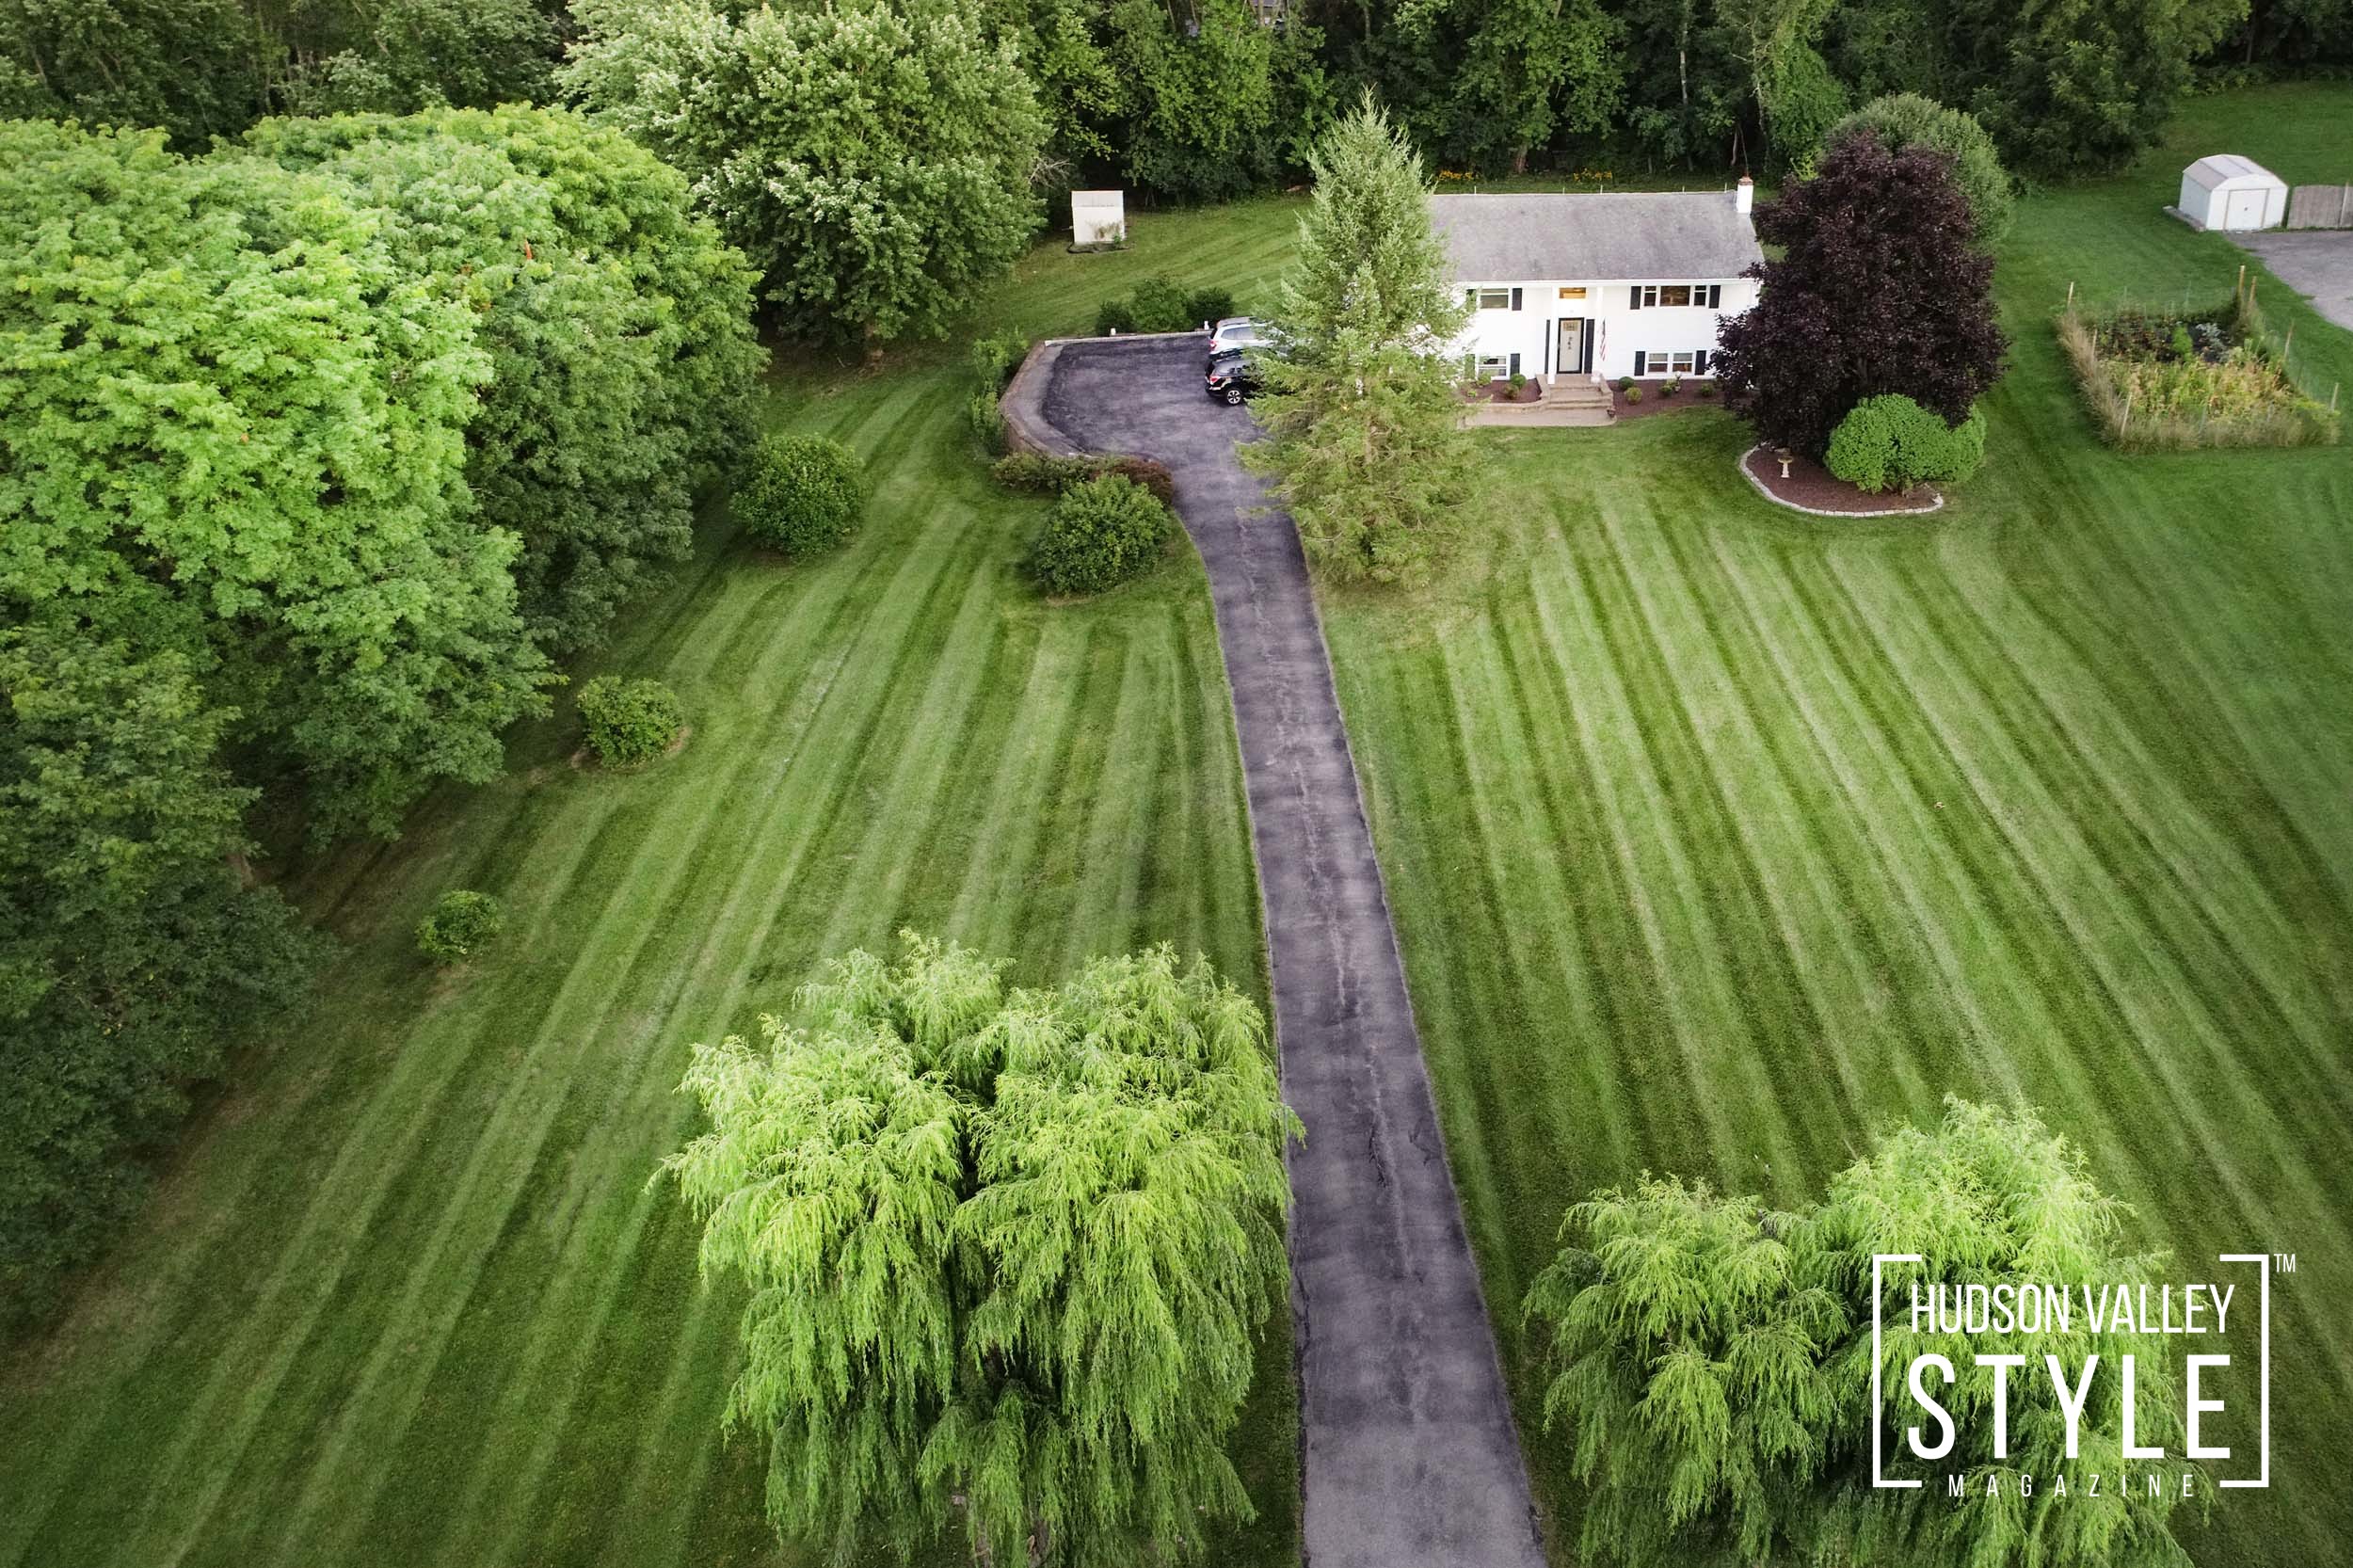 Hudson Valley Home for Sale - Alexander Maxwell Realty - Best Hudson Valley Real Estate